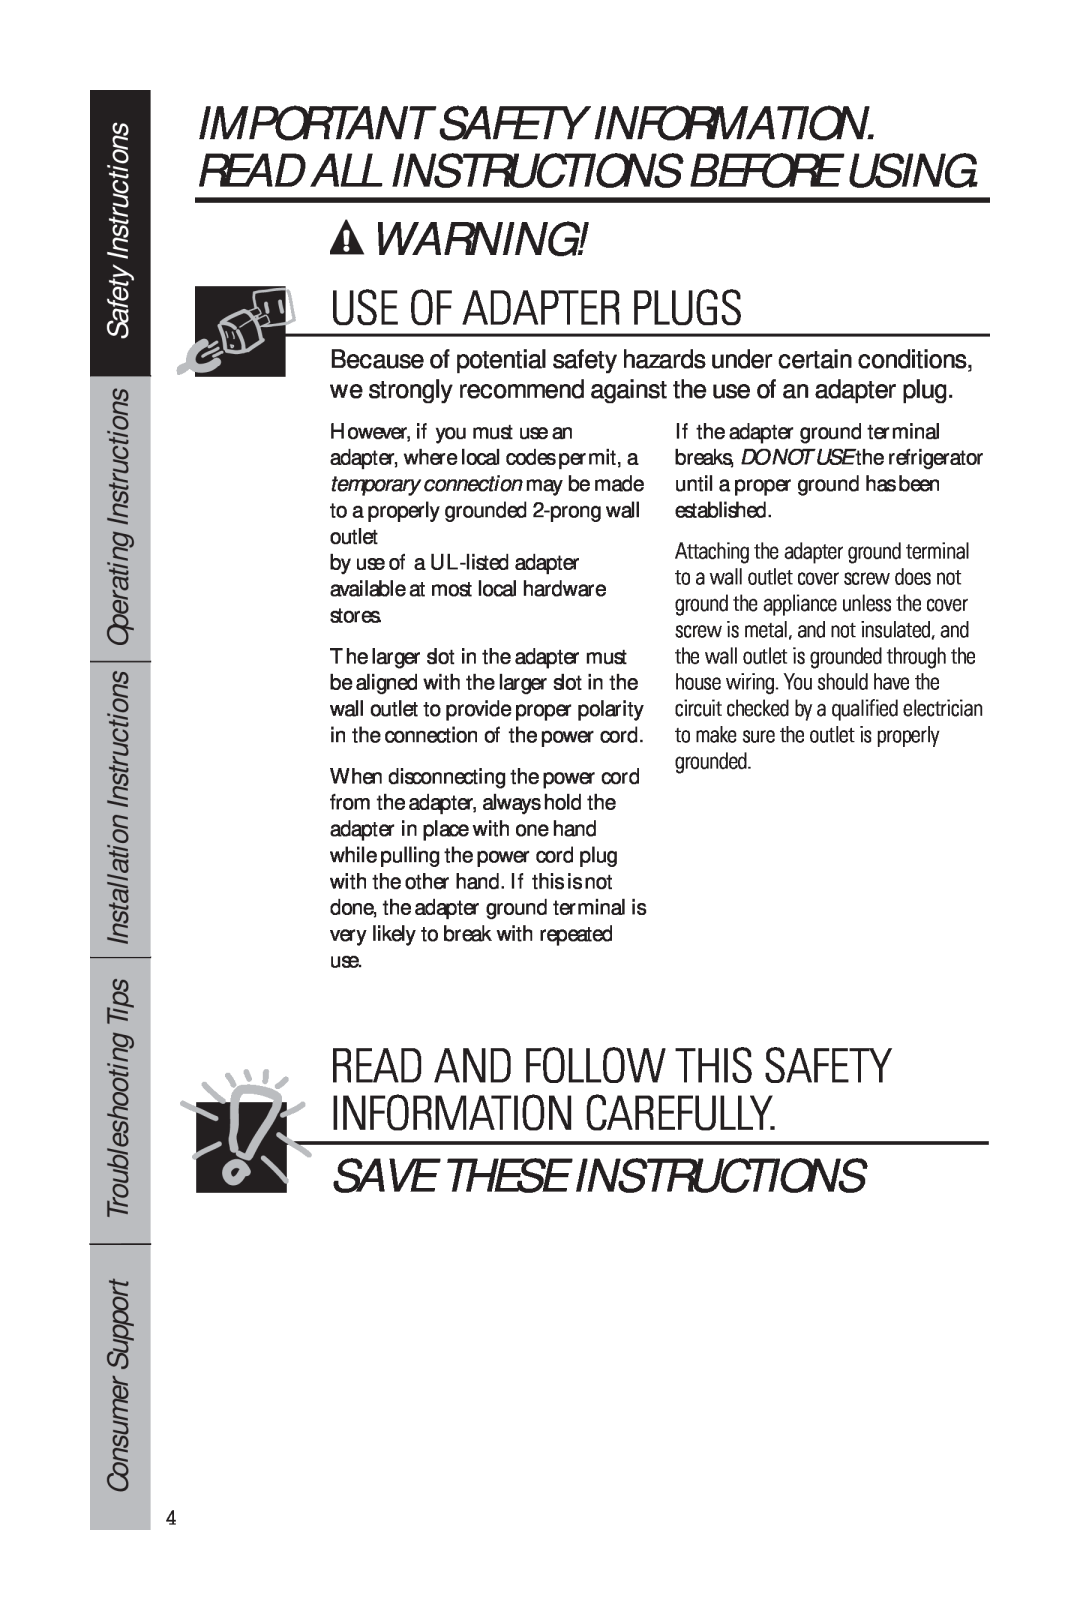 GE 49-60634-1 Use Of Adapter Plugs, Safety Instructions, Consumer Support Troubleshooting, Save These Instructions 